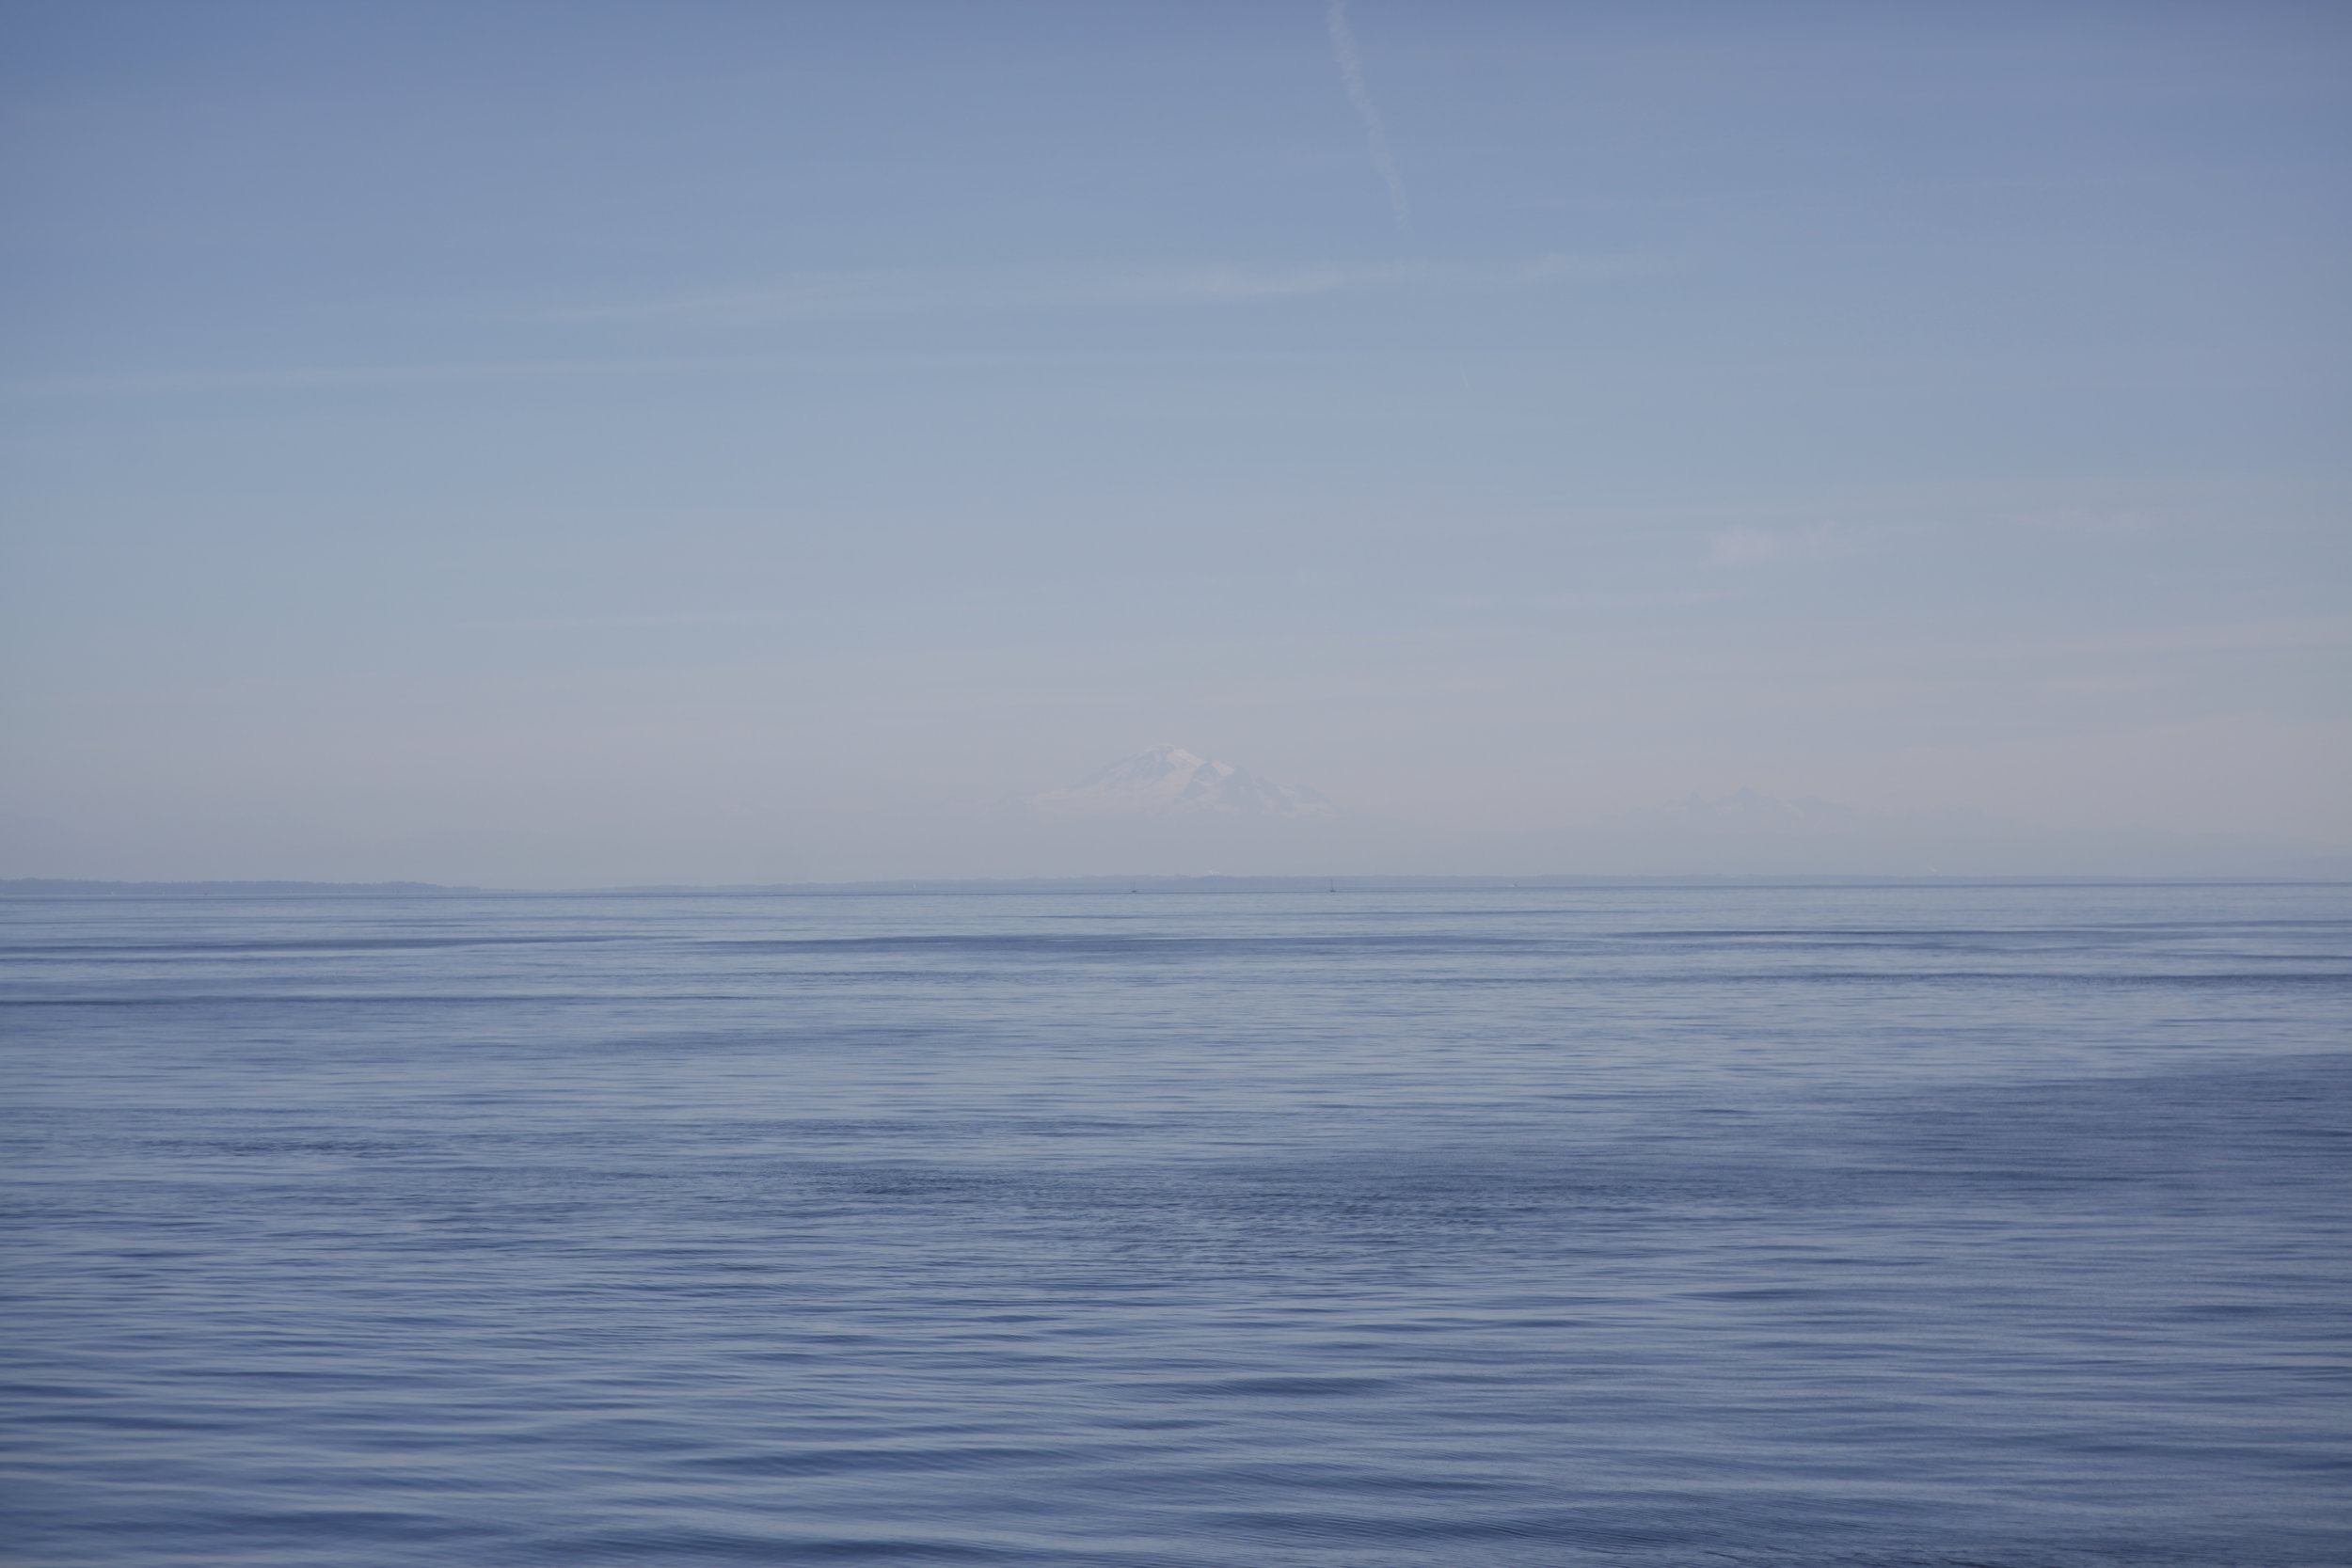  Mt. Baker, BC, Canada (view from somewhere near the Gulf Islands) 2014   